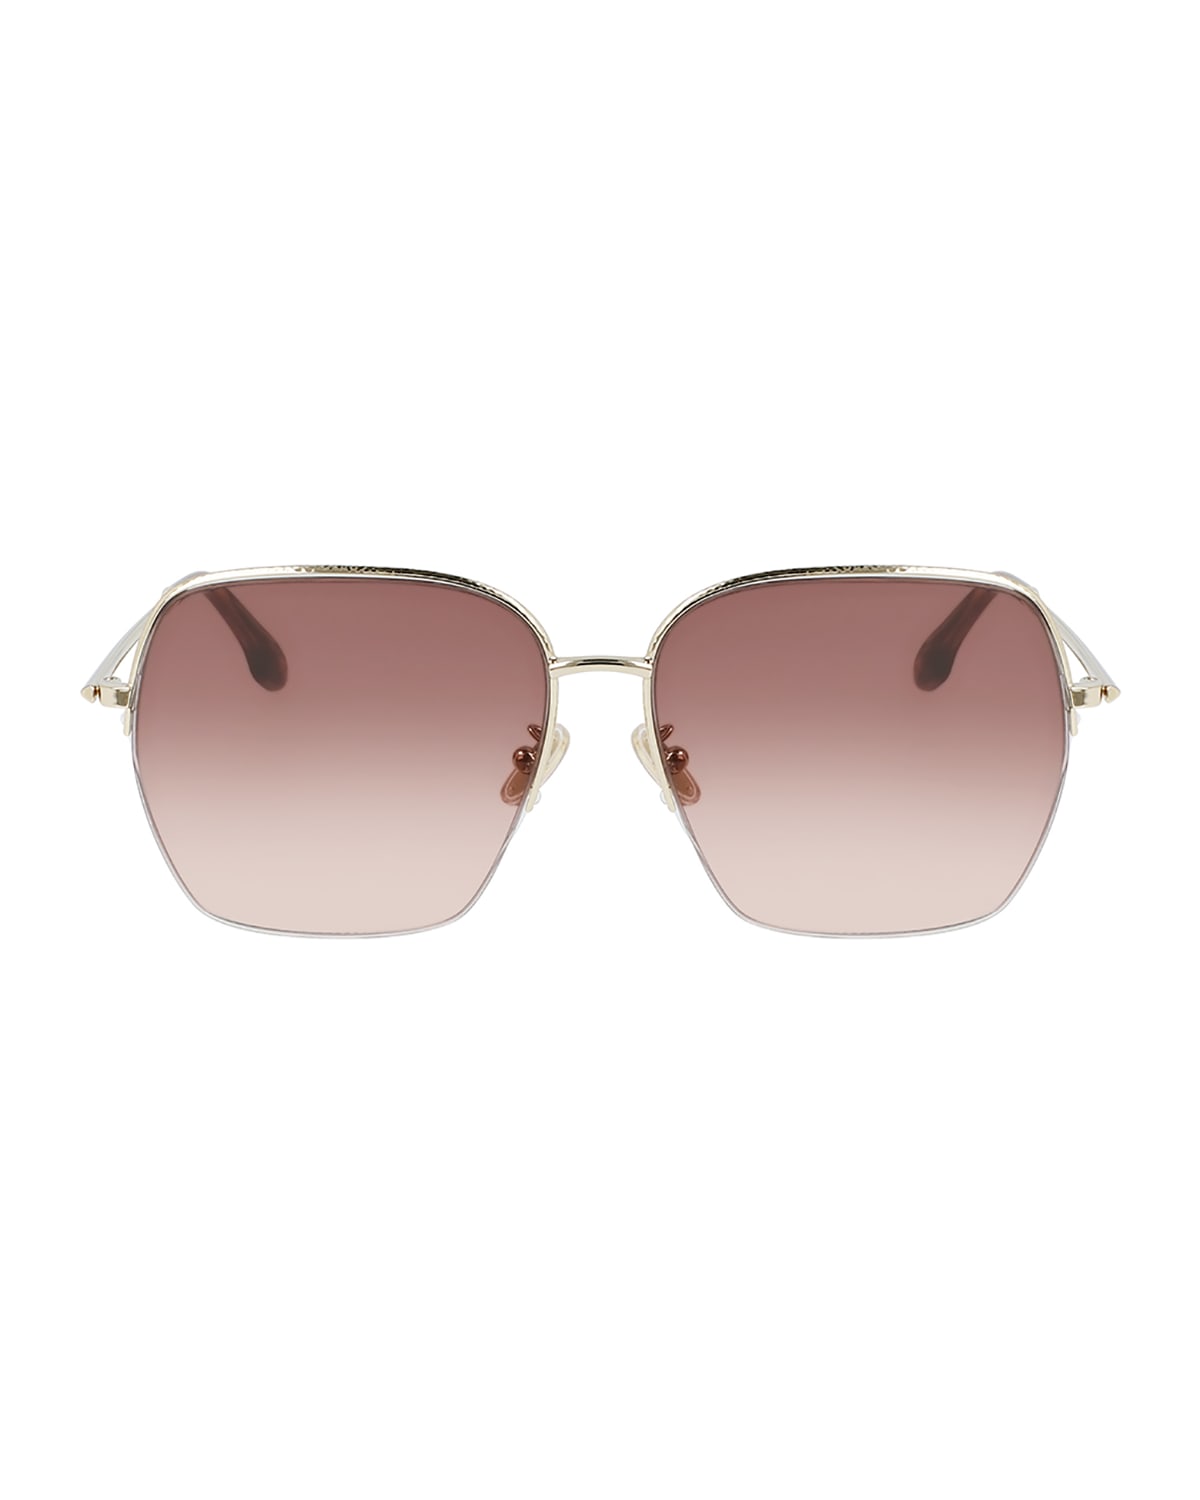 Hammered Oversized Square Metal Sunglasses